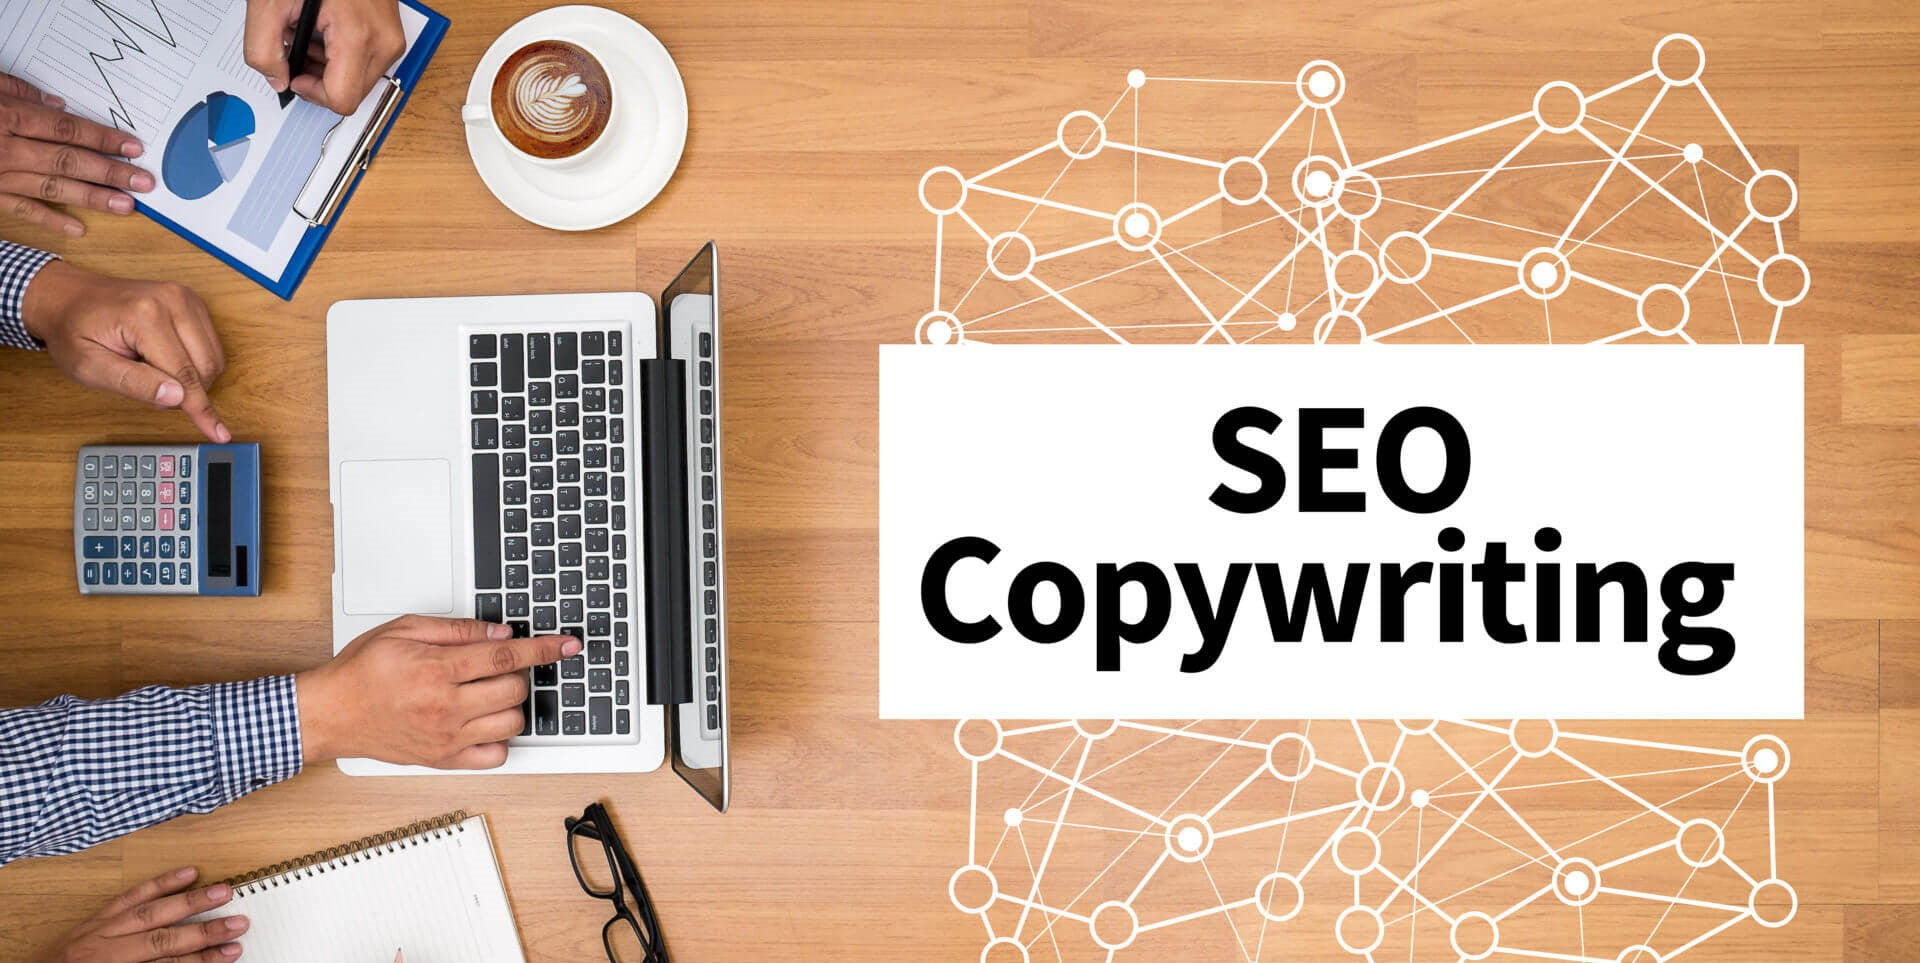 SEO Copywriting: A Guide to Creating High-Quality, Optimized Content for Better Rankings